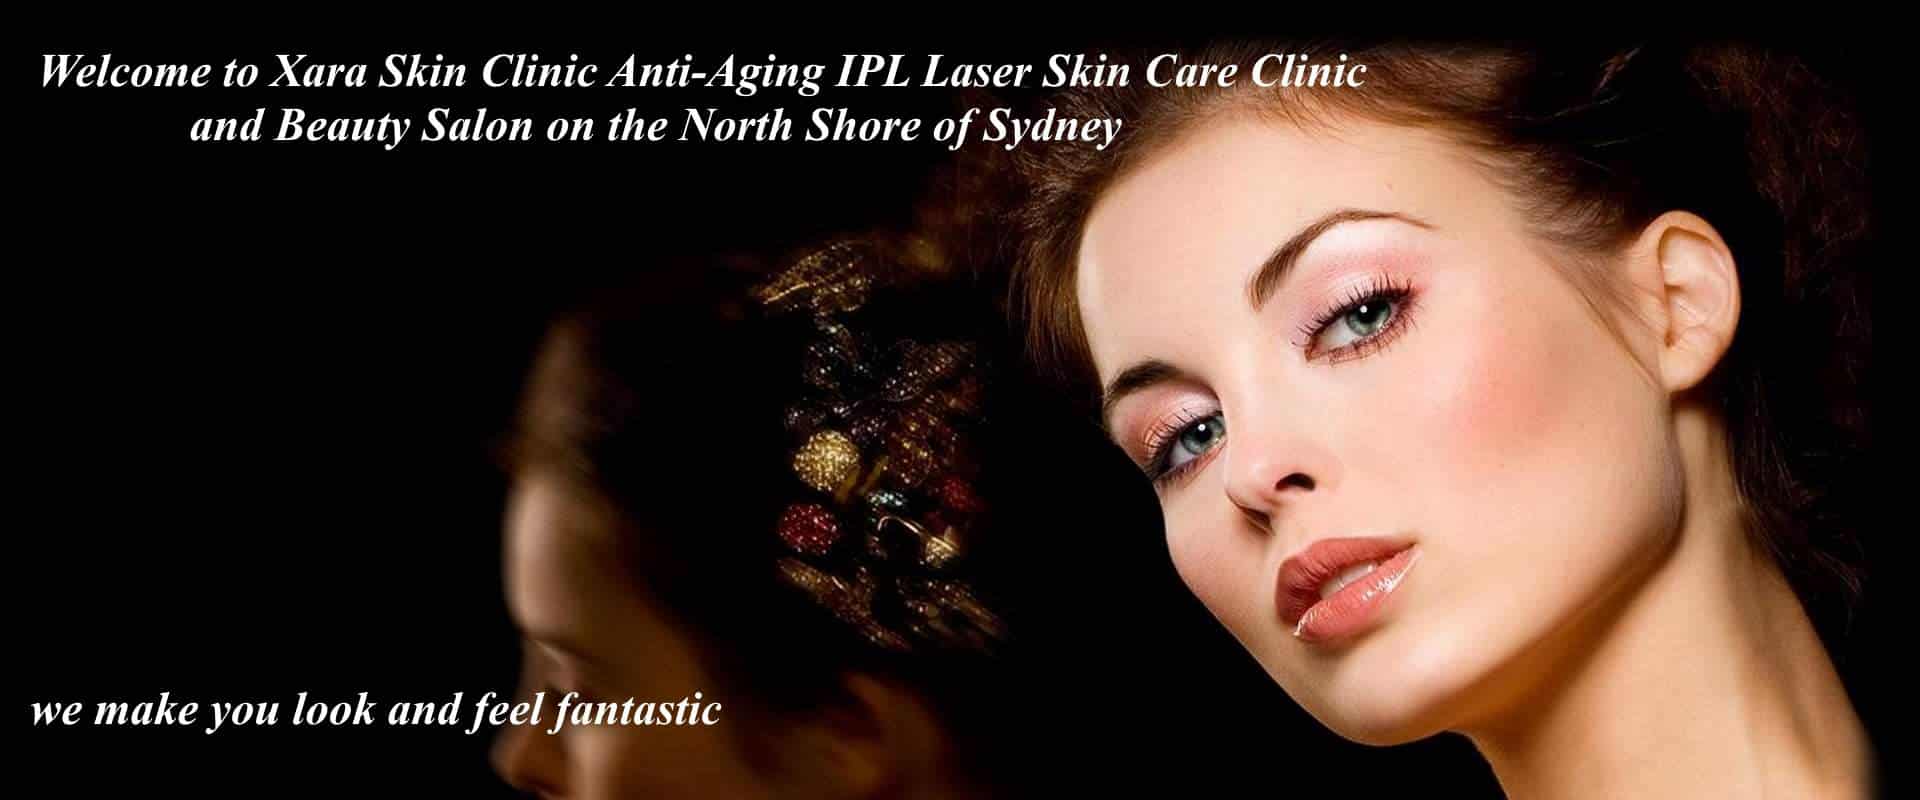 Case study laser clinic Sydney what makes a good business